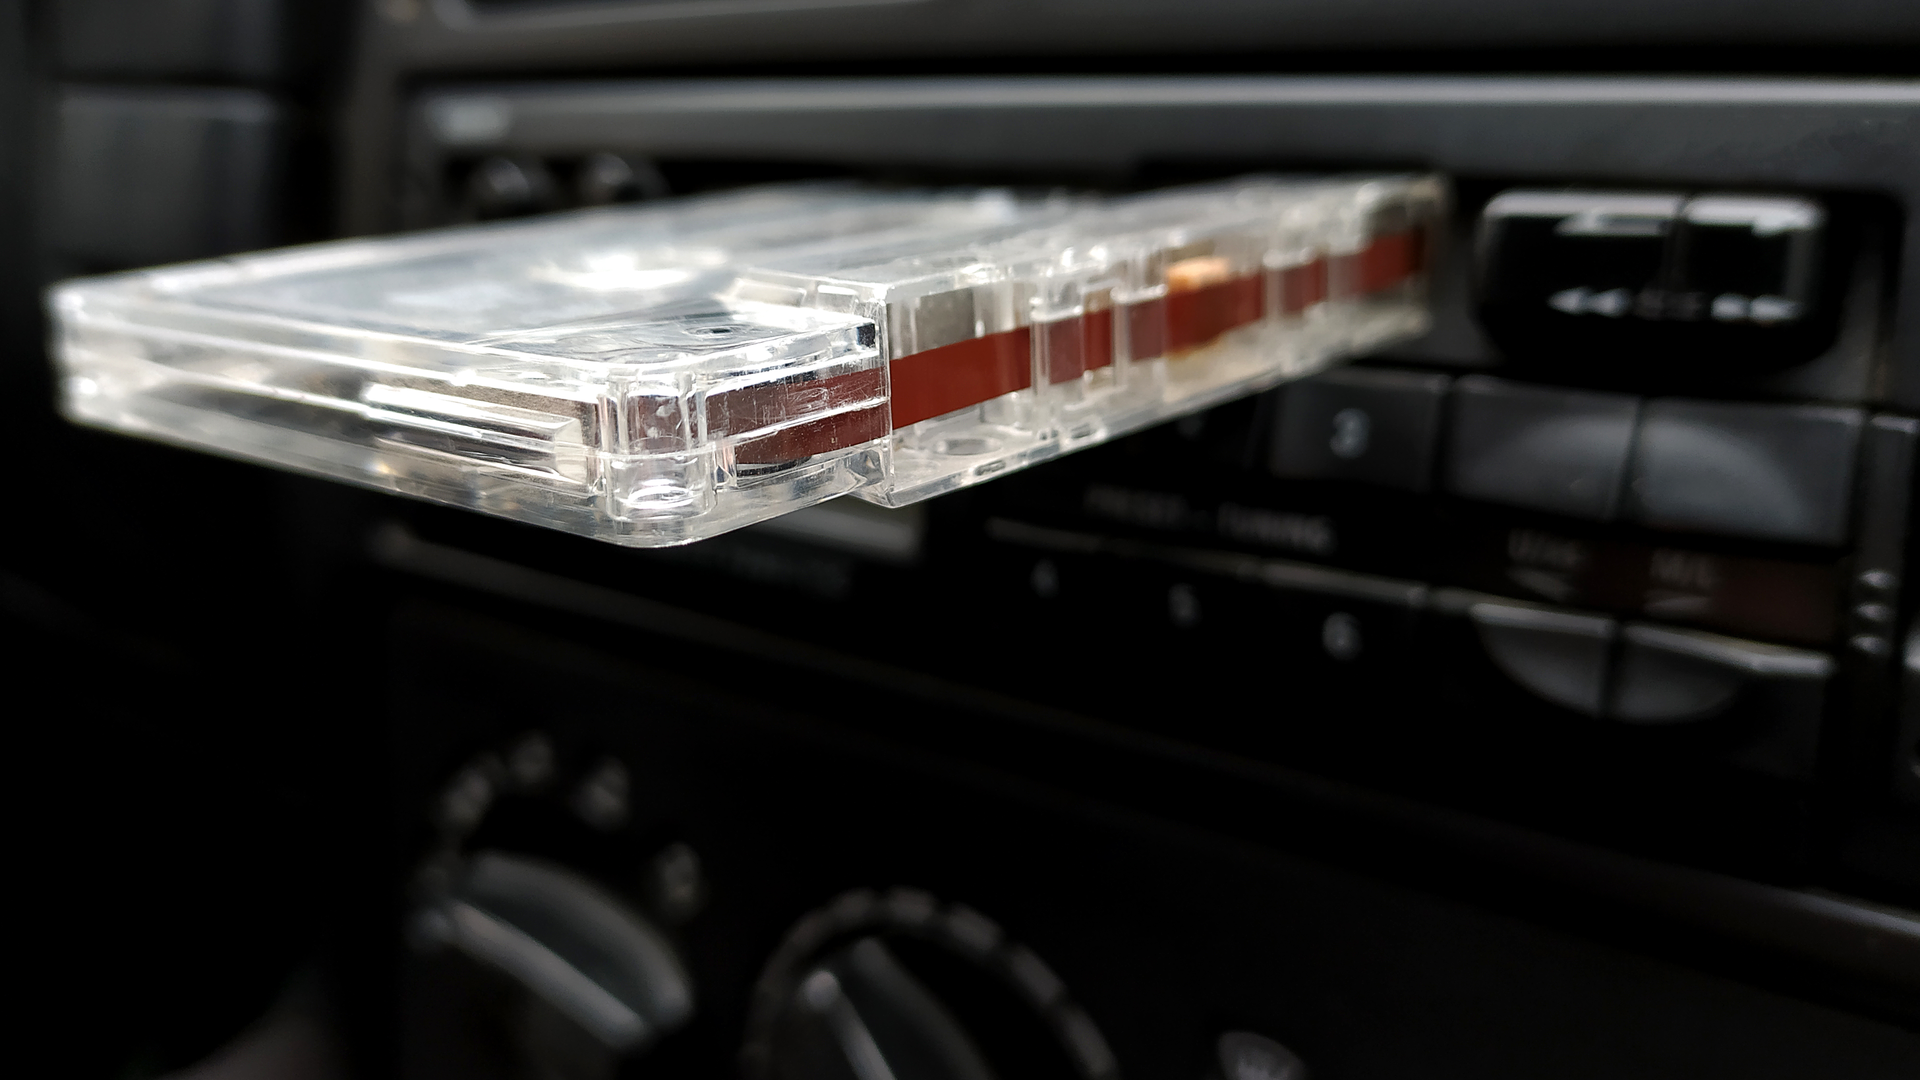 A tape deck inside a car with a cassette hanging out.